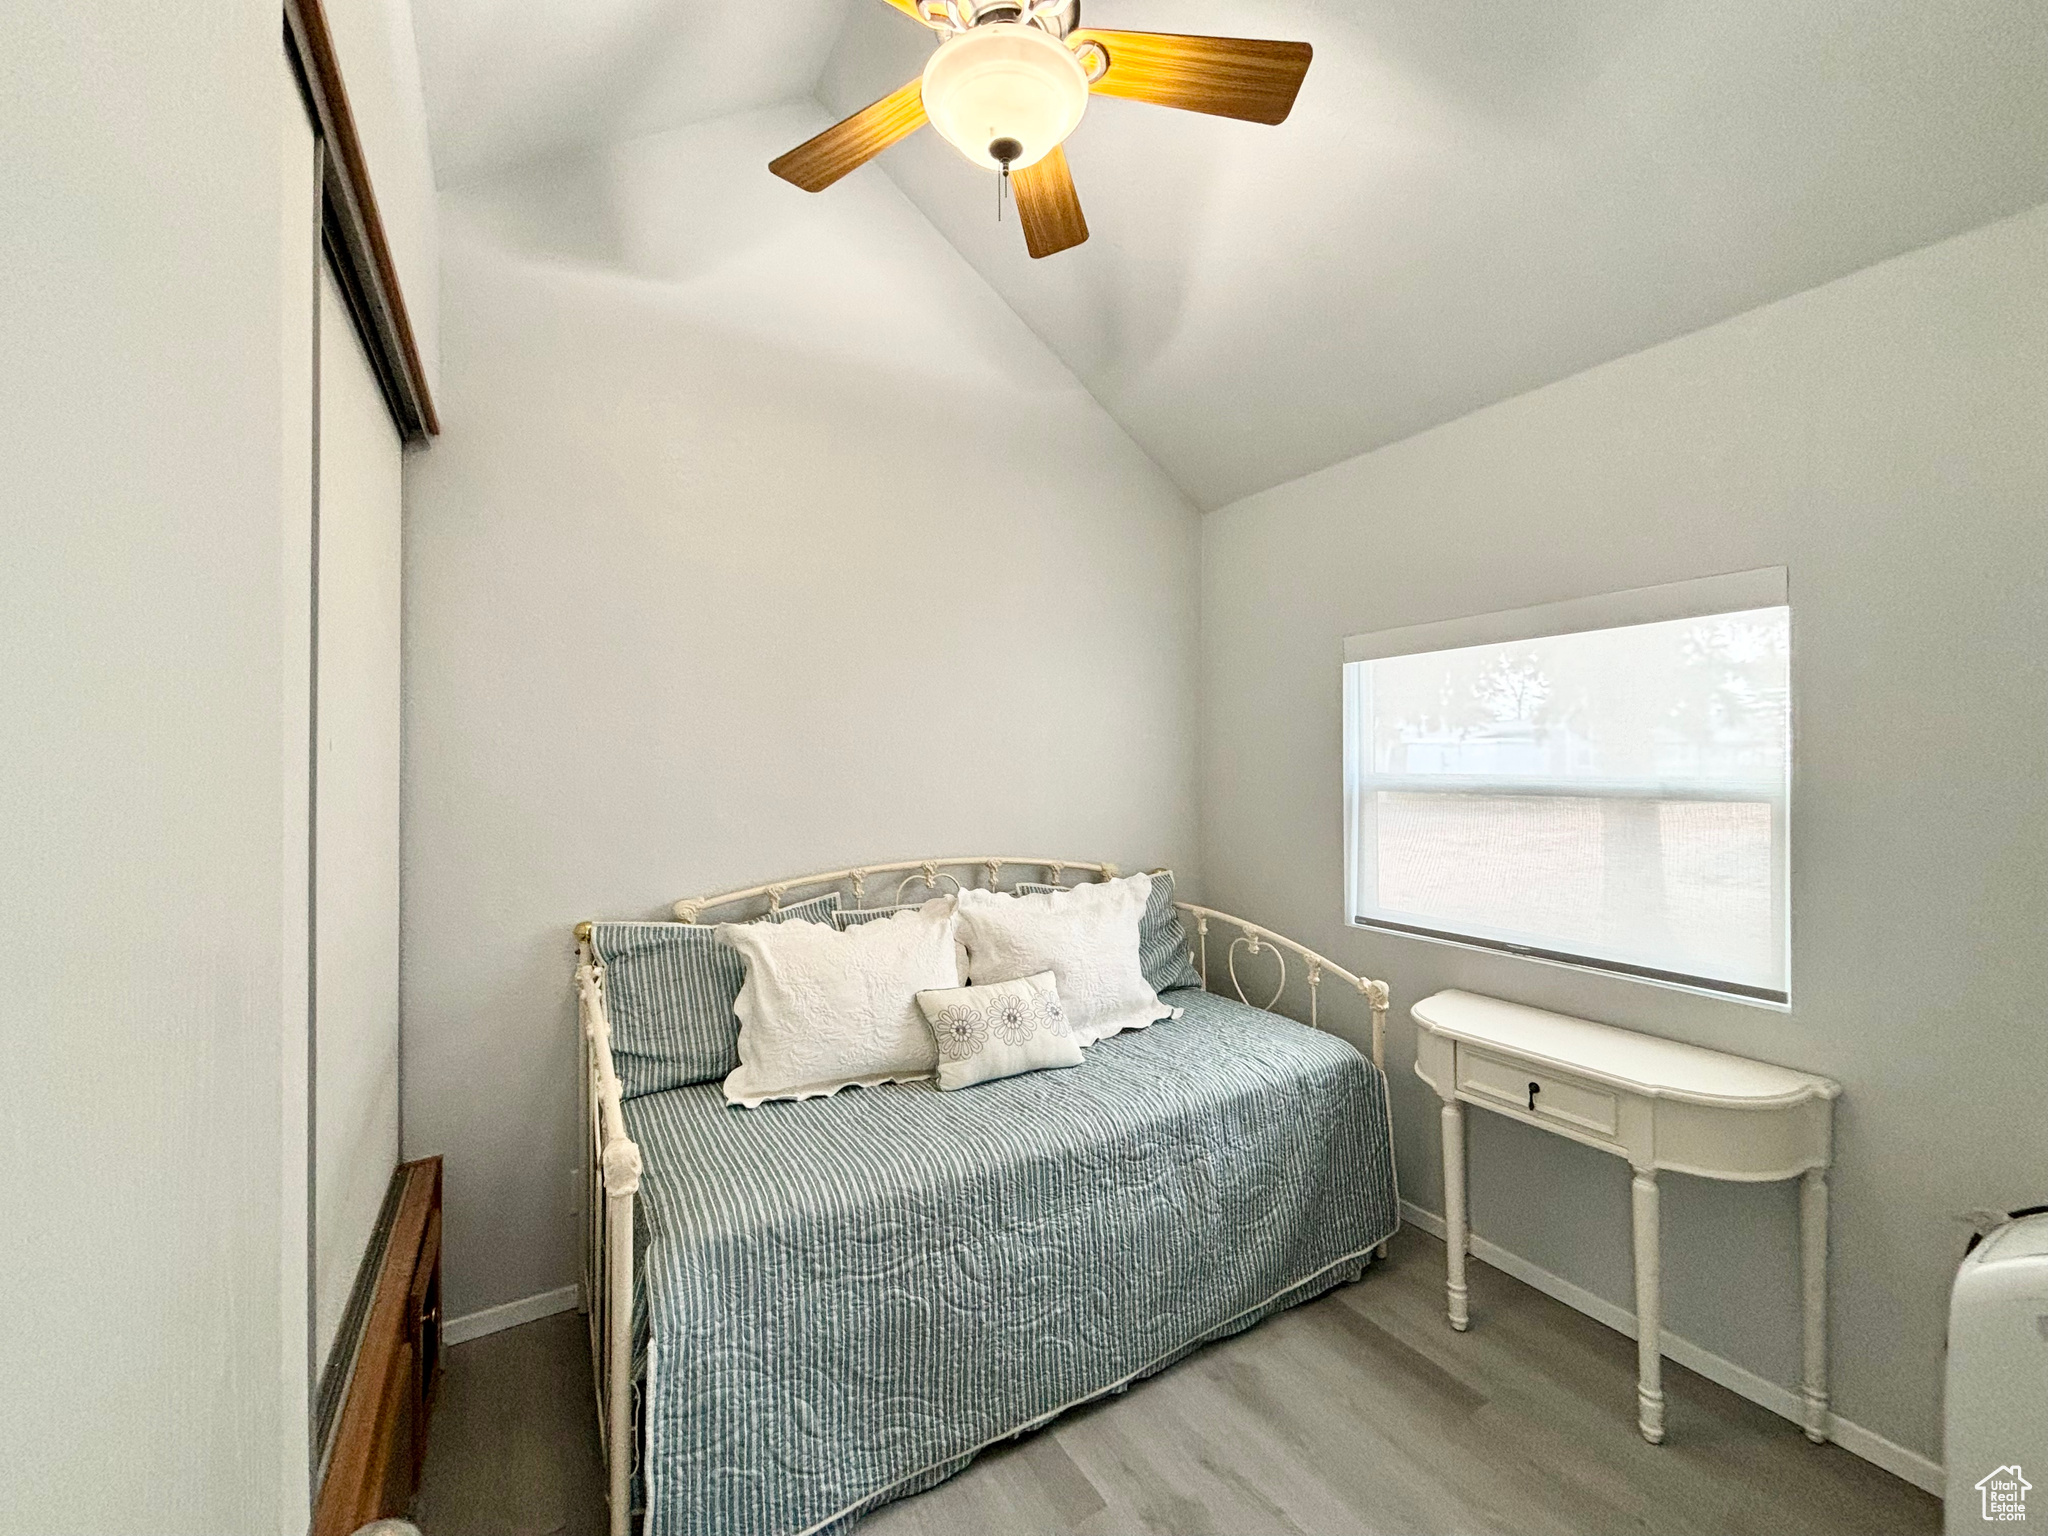 Bedroom features a full wall length closet, built ins, and lofty vaulted ceilings!